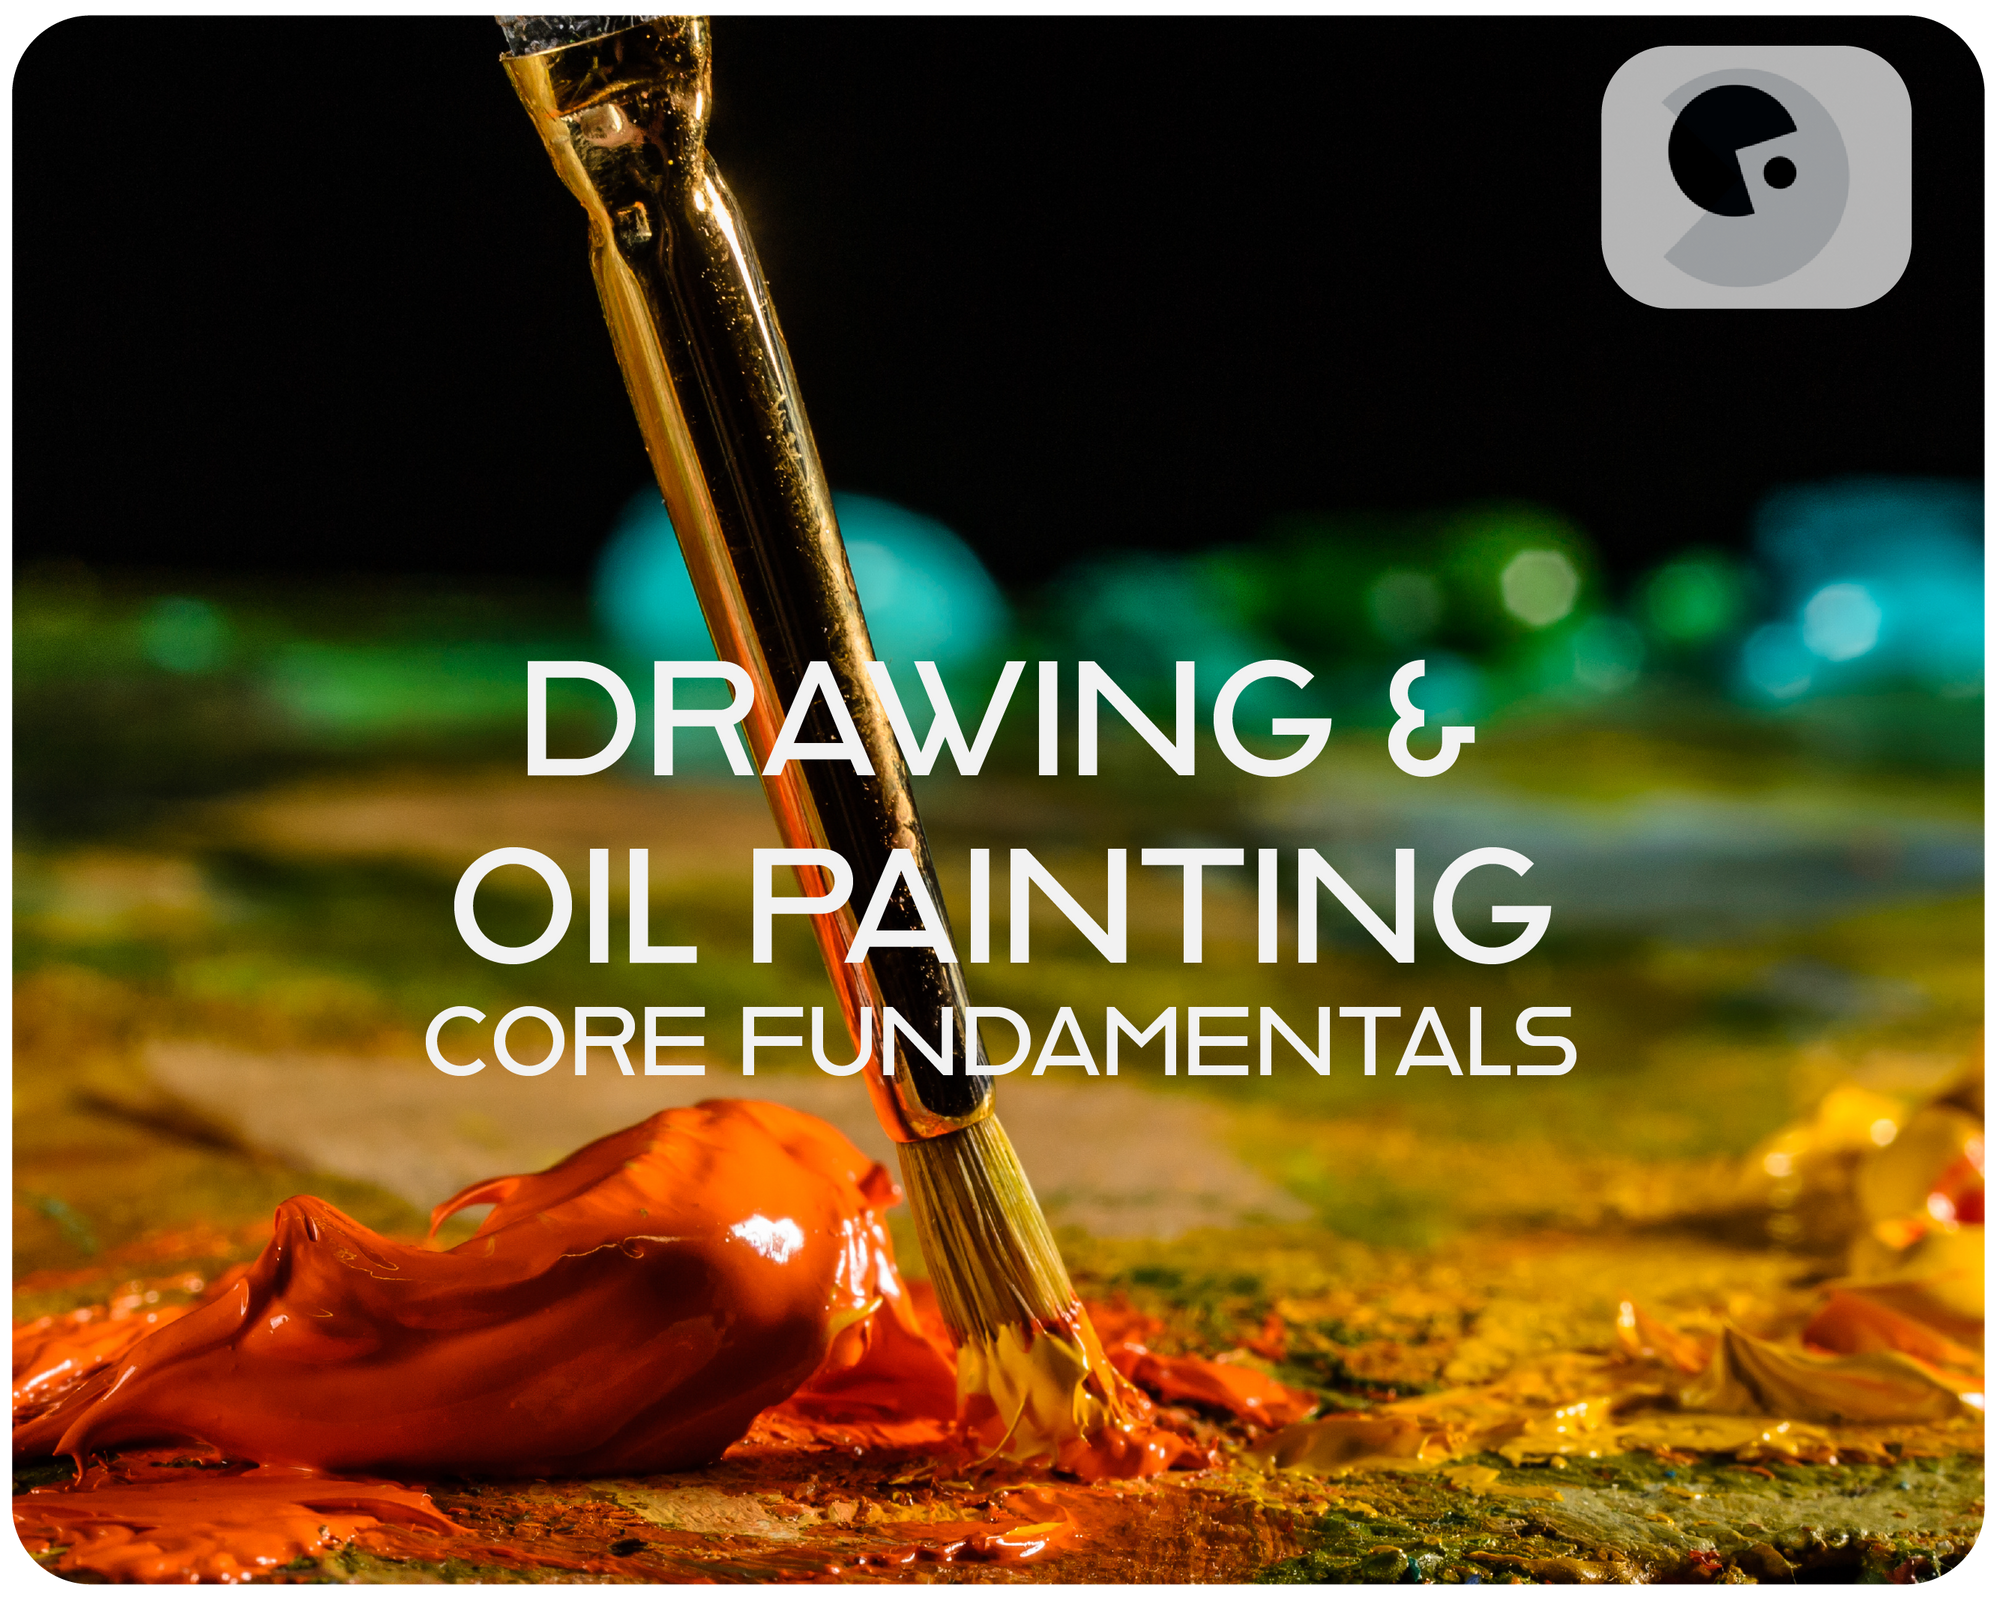 Drawing & Oil Painting - Core Fundamentals of Fine Arts! - Part 1 | Grade 9-12